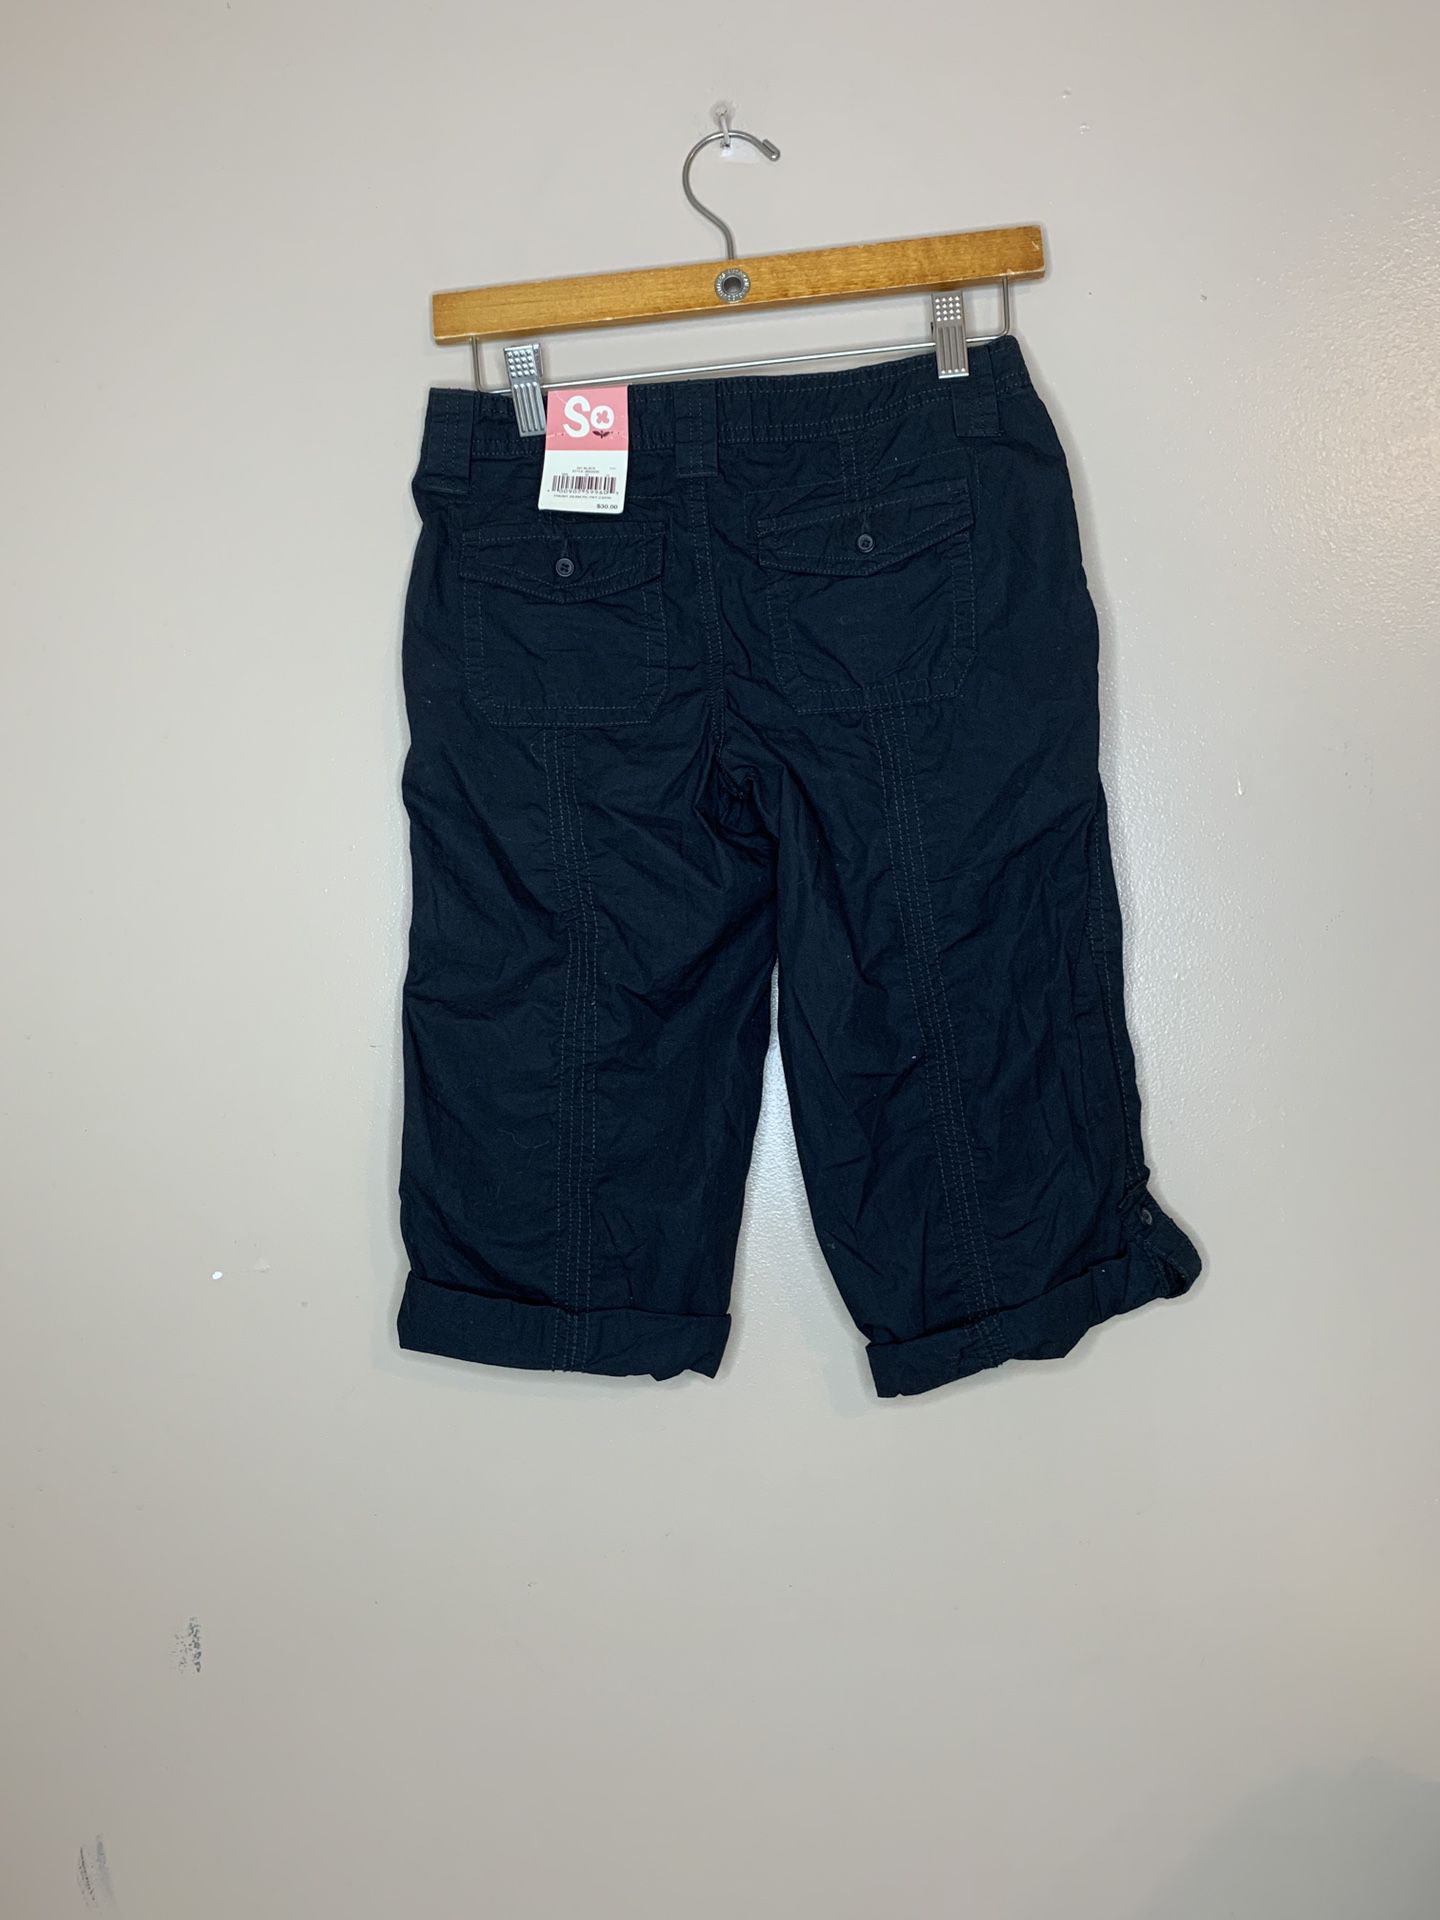 SO Black Cargo Capri Pants With Drawstrings Juniors Size 1 New with tags